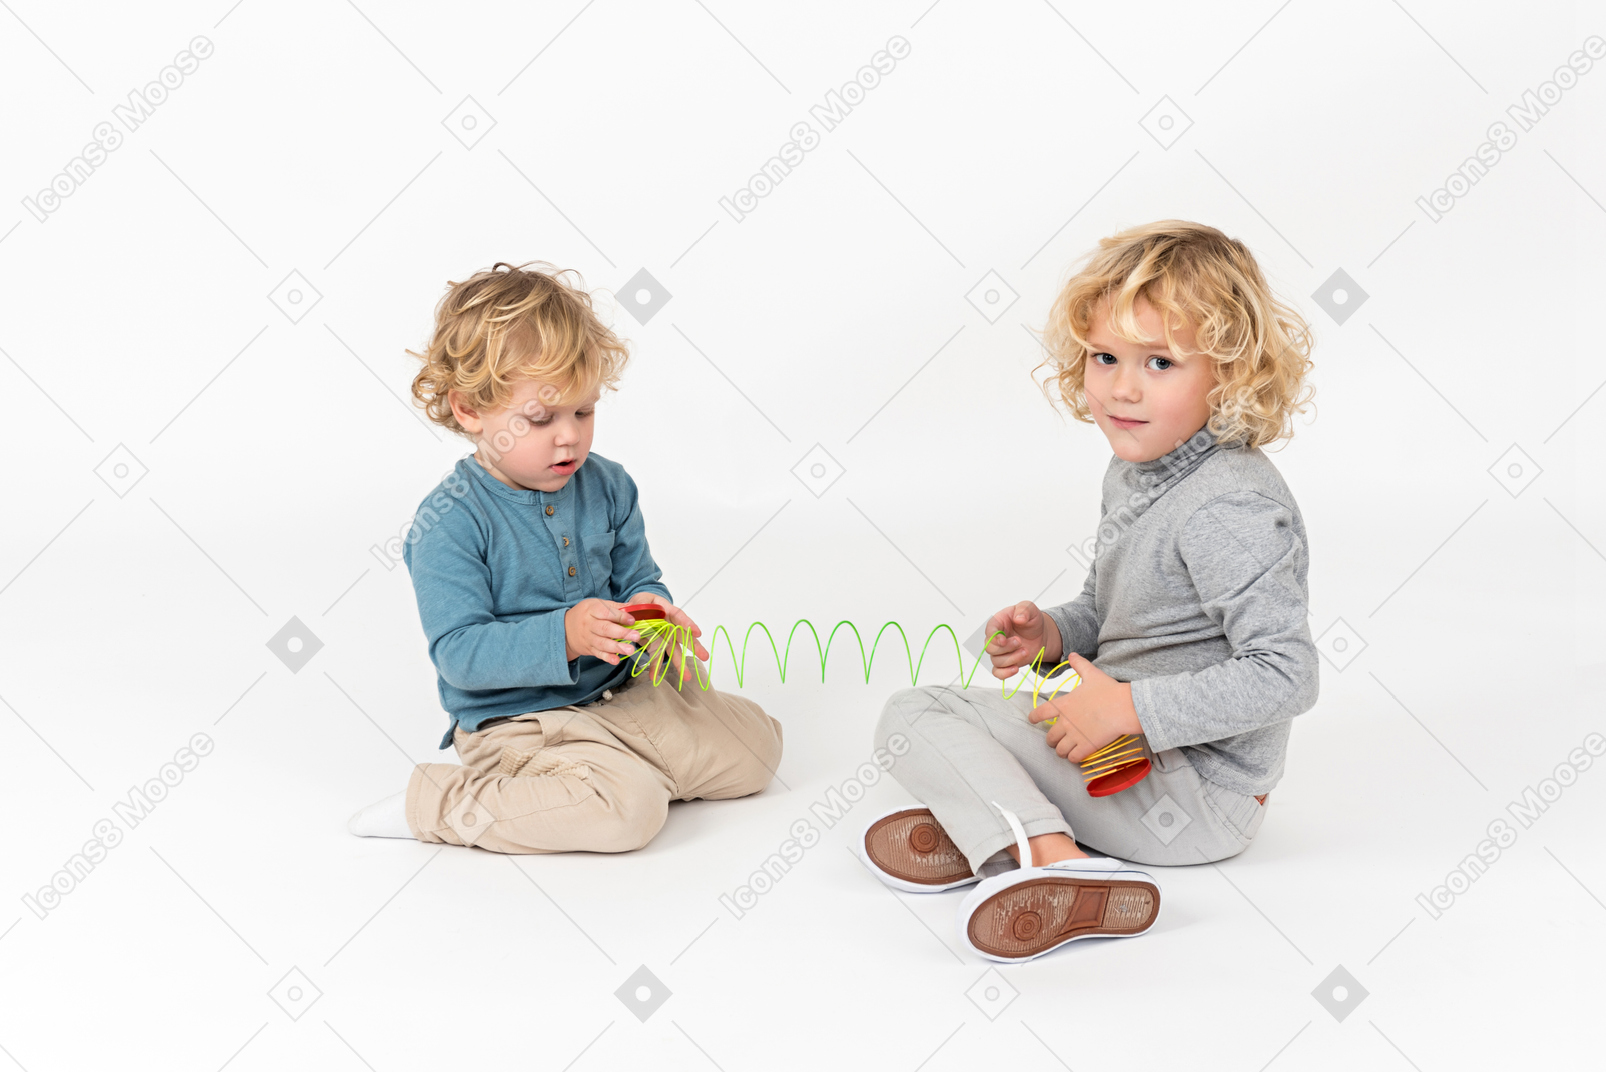 Brothers playing with toys together